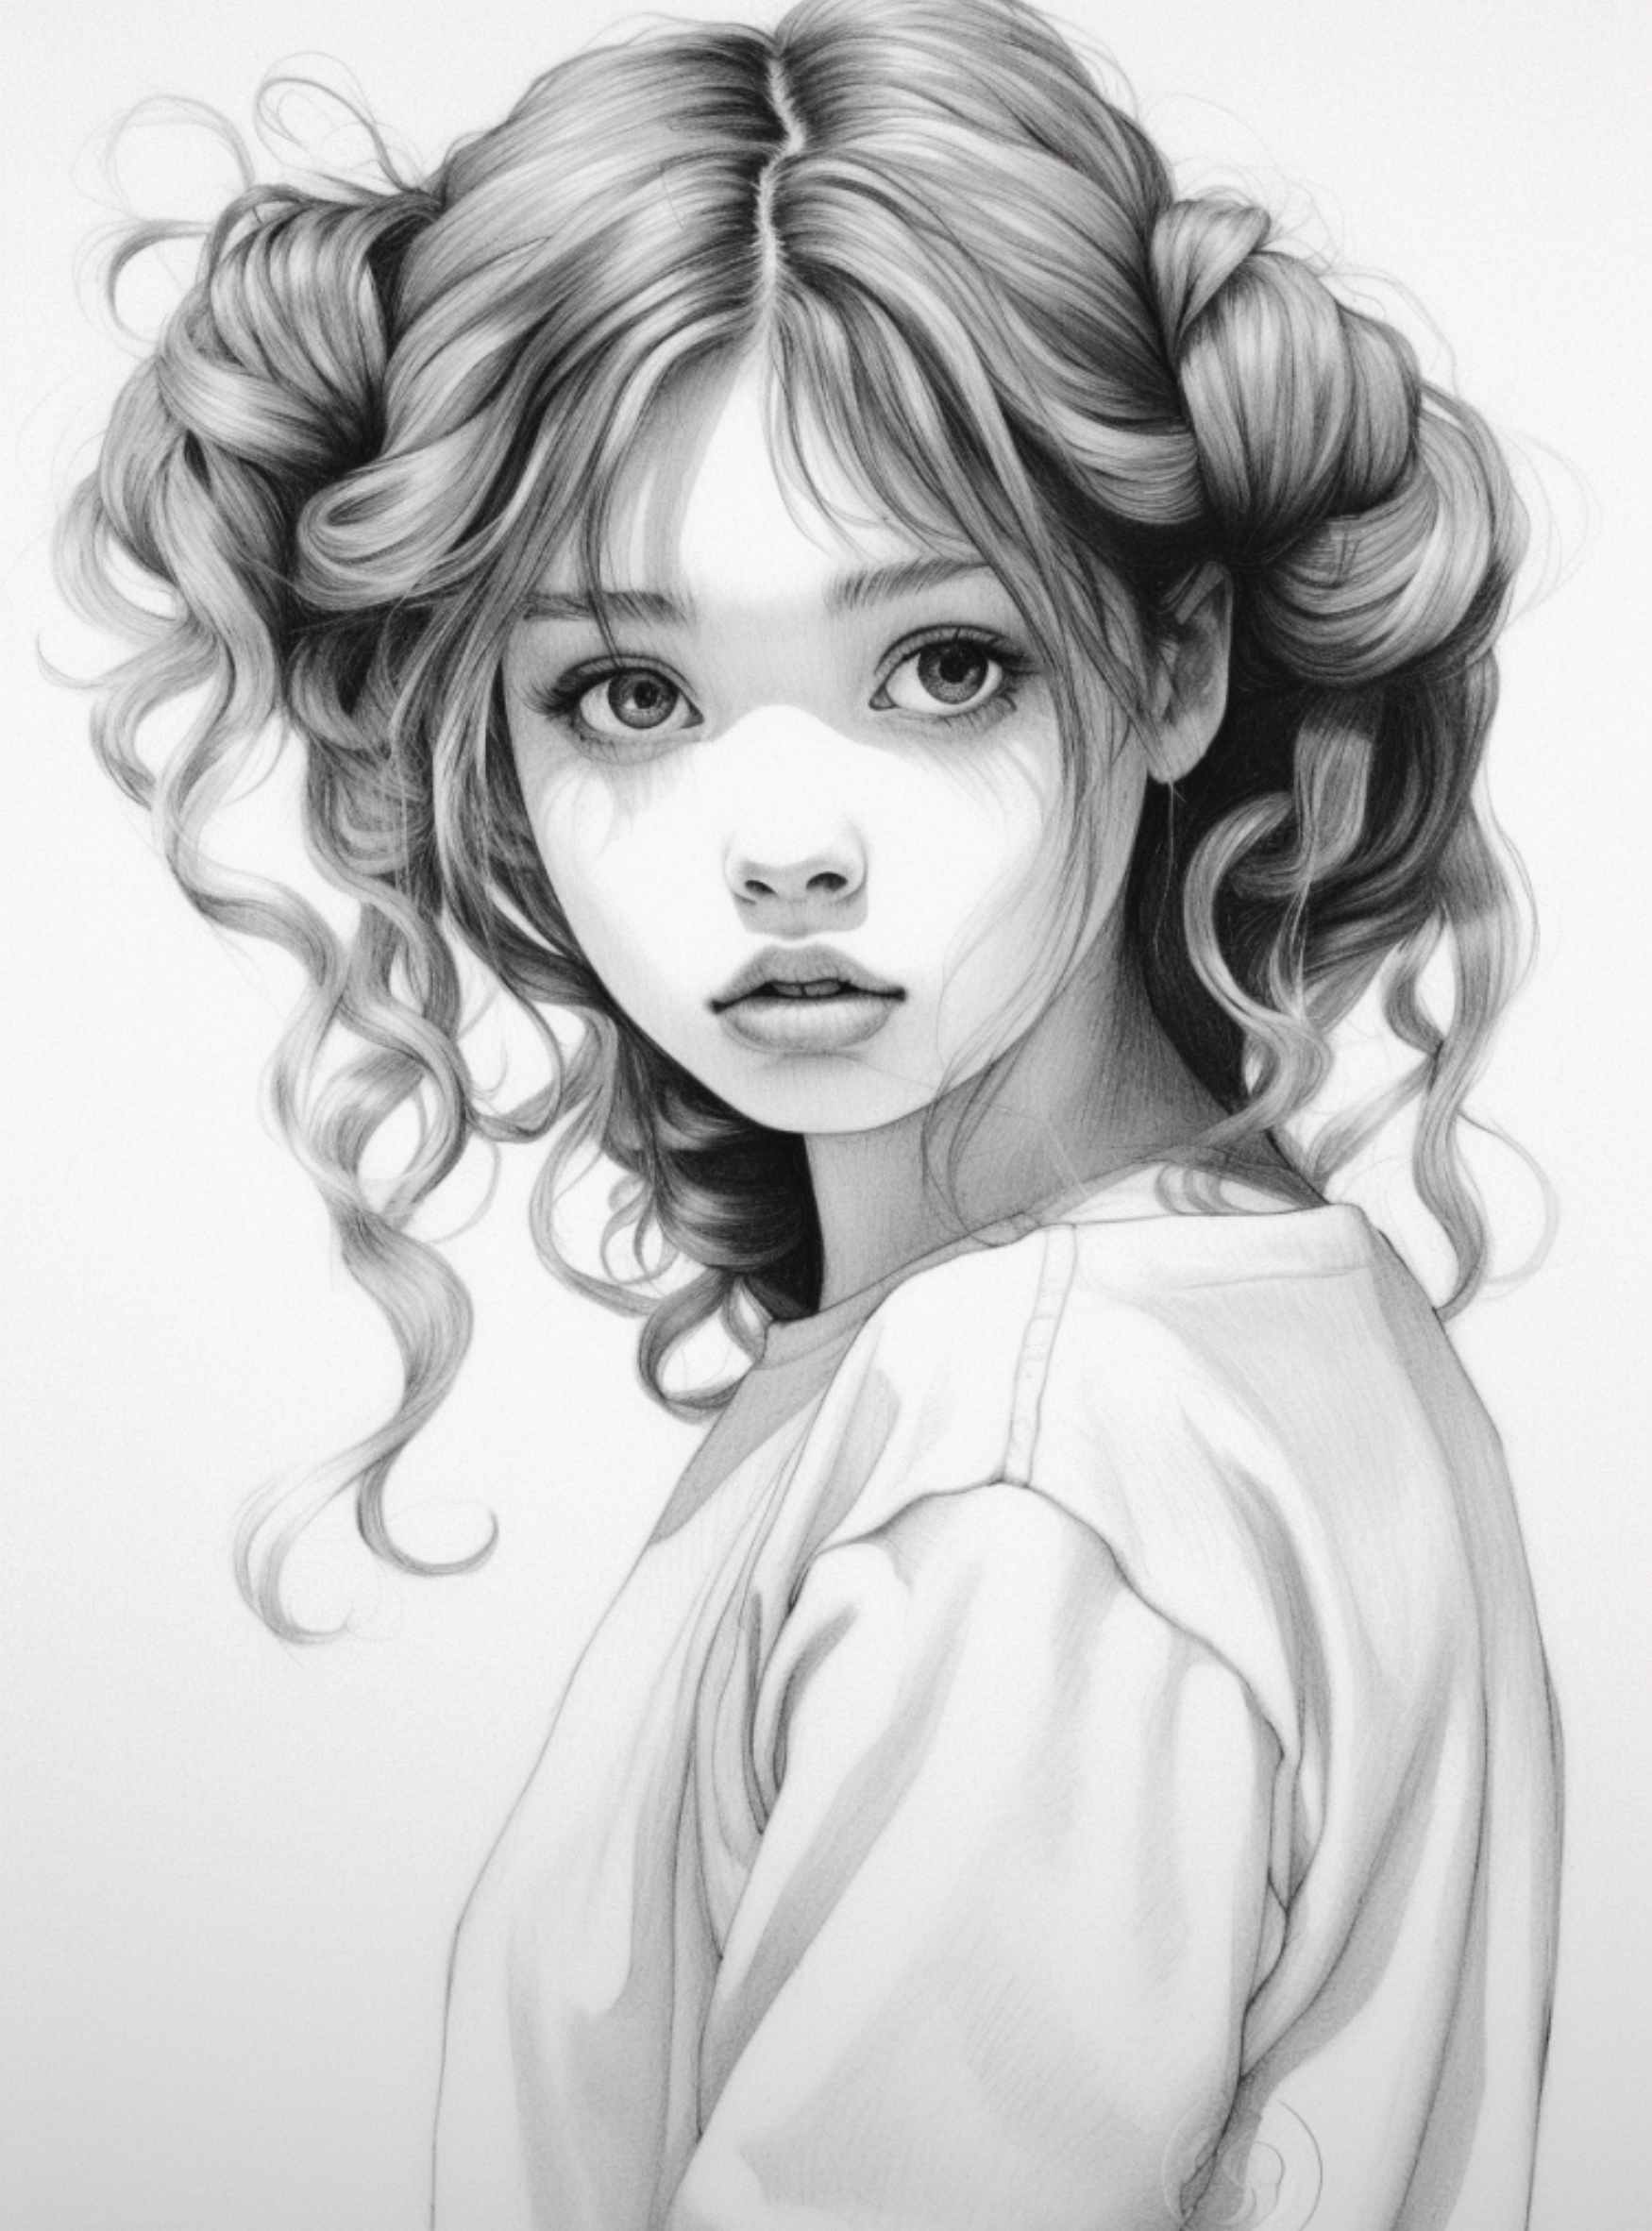 Cute Anime Drawings: A Guide for Beginners - Artsydee - Drawing ...